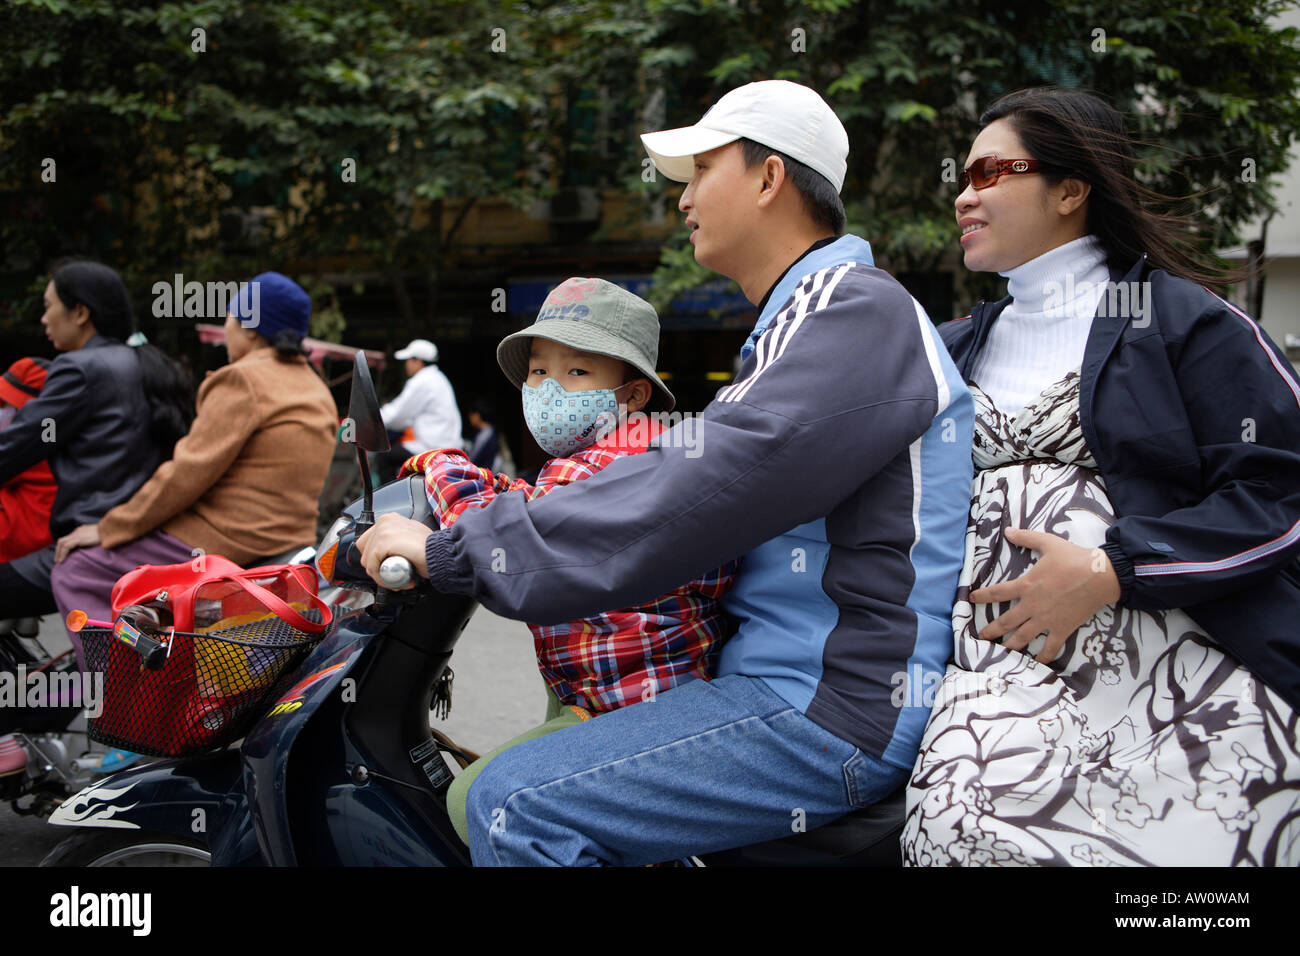 Family on Scooter in Traffic Hanoi North Vietnam Stock Photo